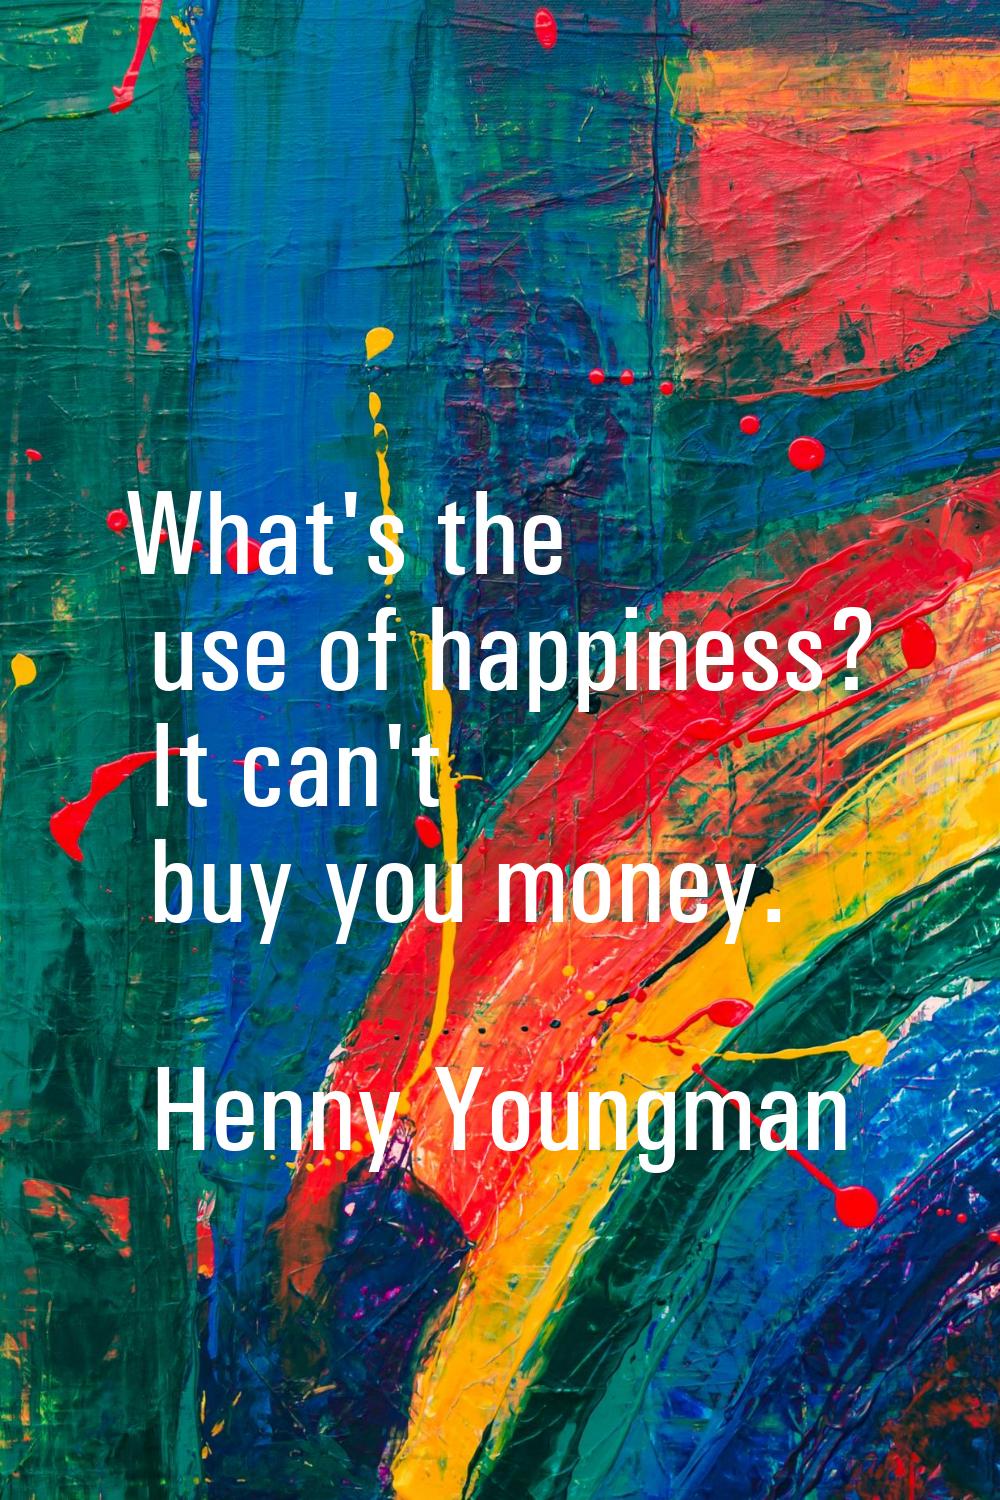 What's the use of happiness? It can't buy you money.